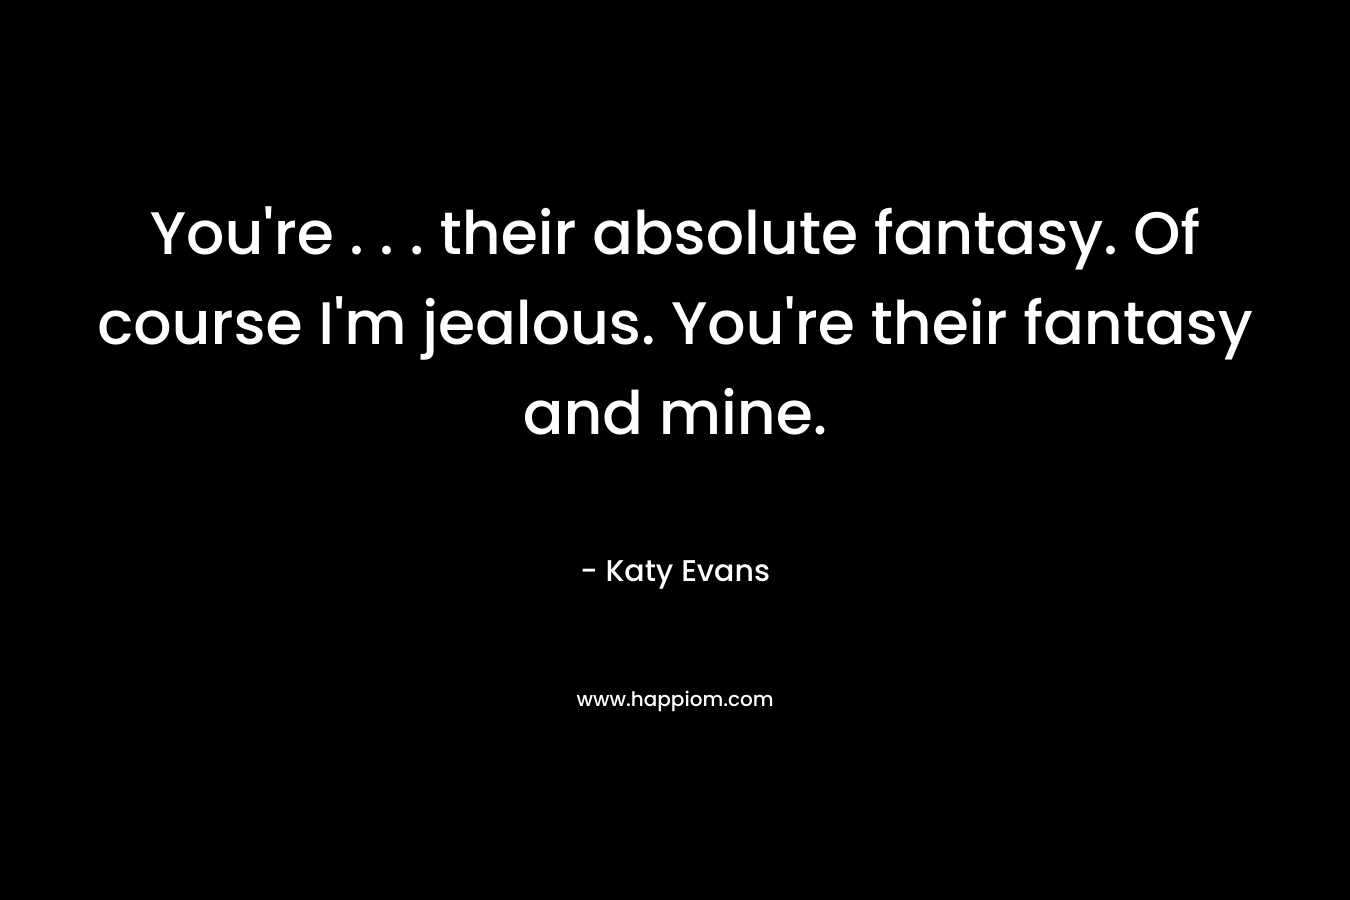 You're . . . their absolute fantasy. Of course I'm jealous. You're their fantasy and mine.